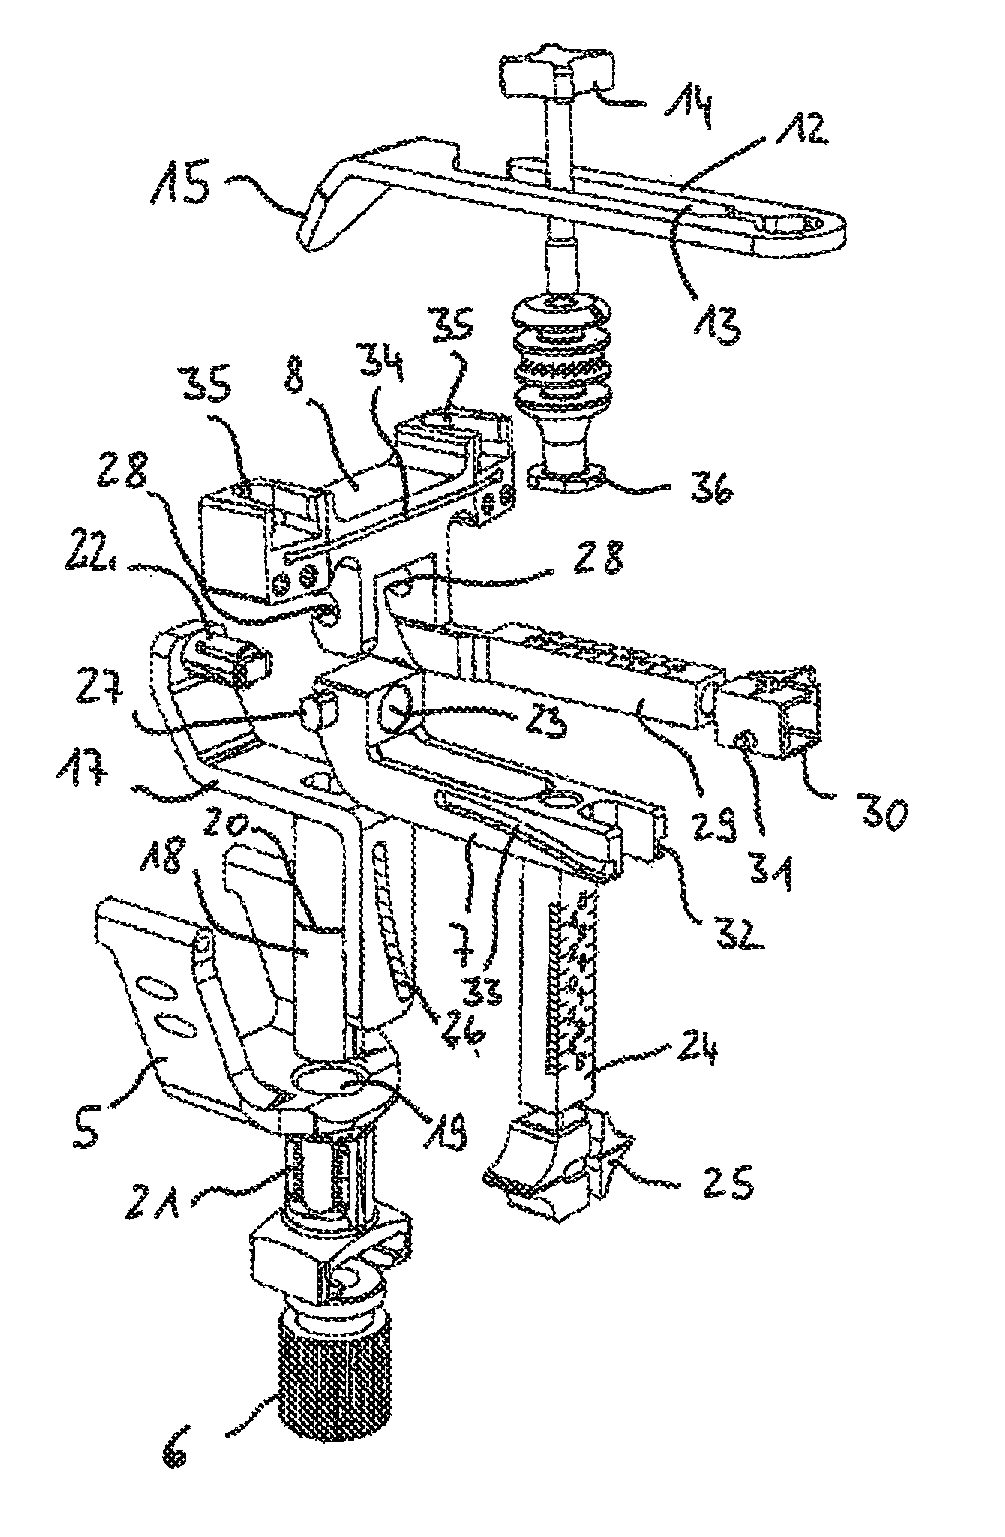 Device for defining a cutting plane for a bone resection